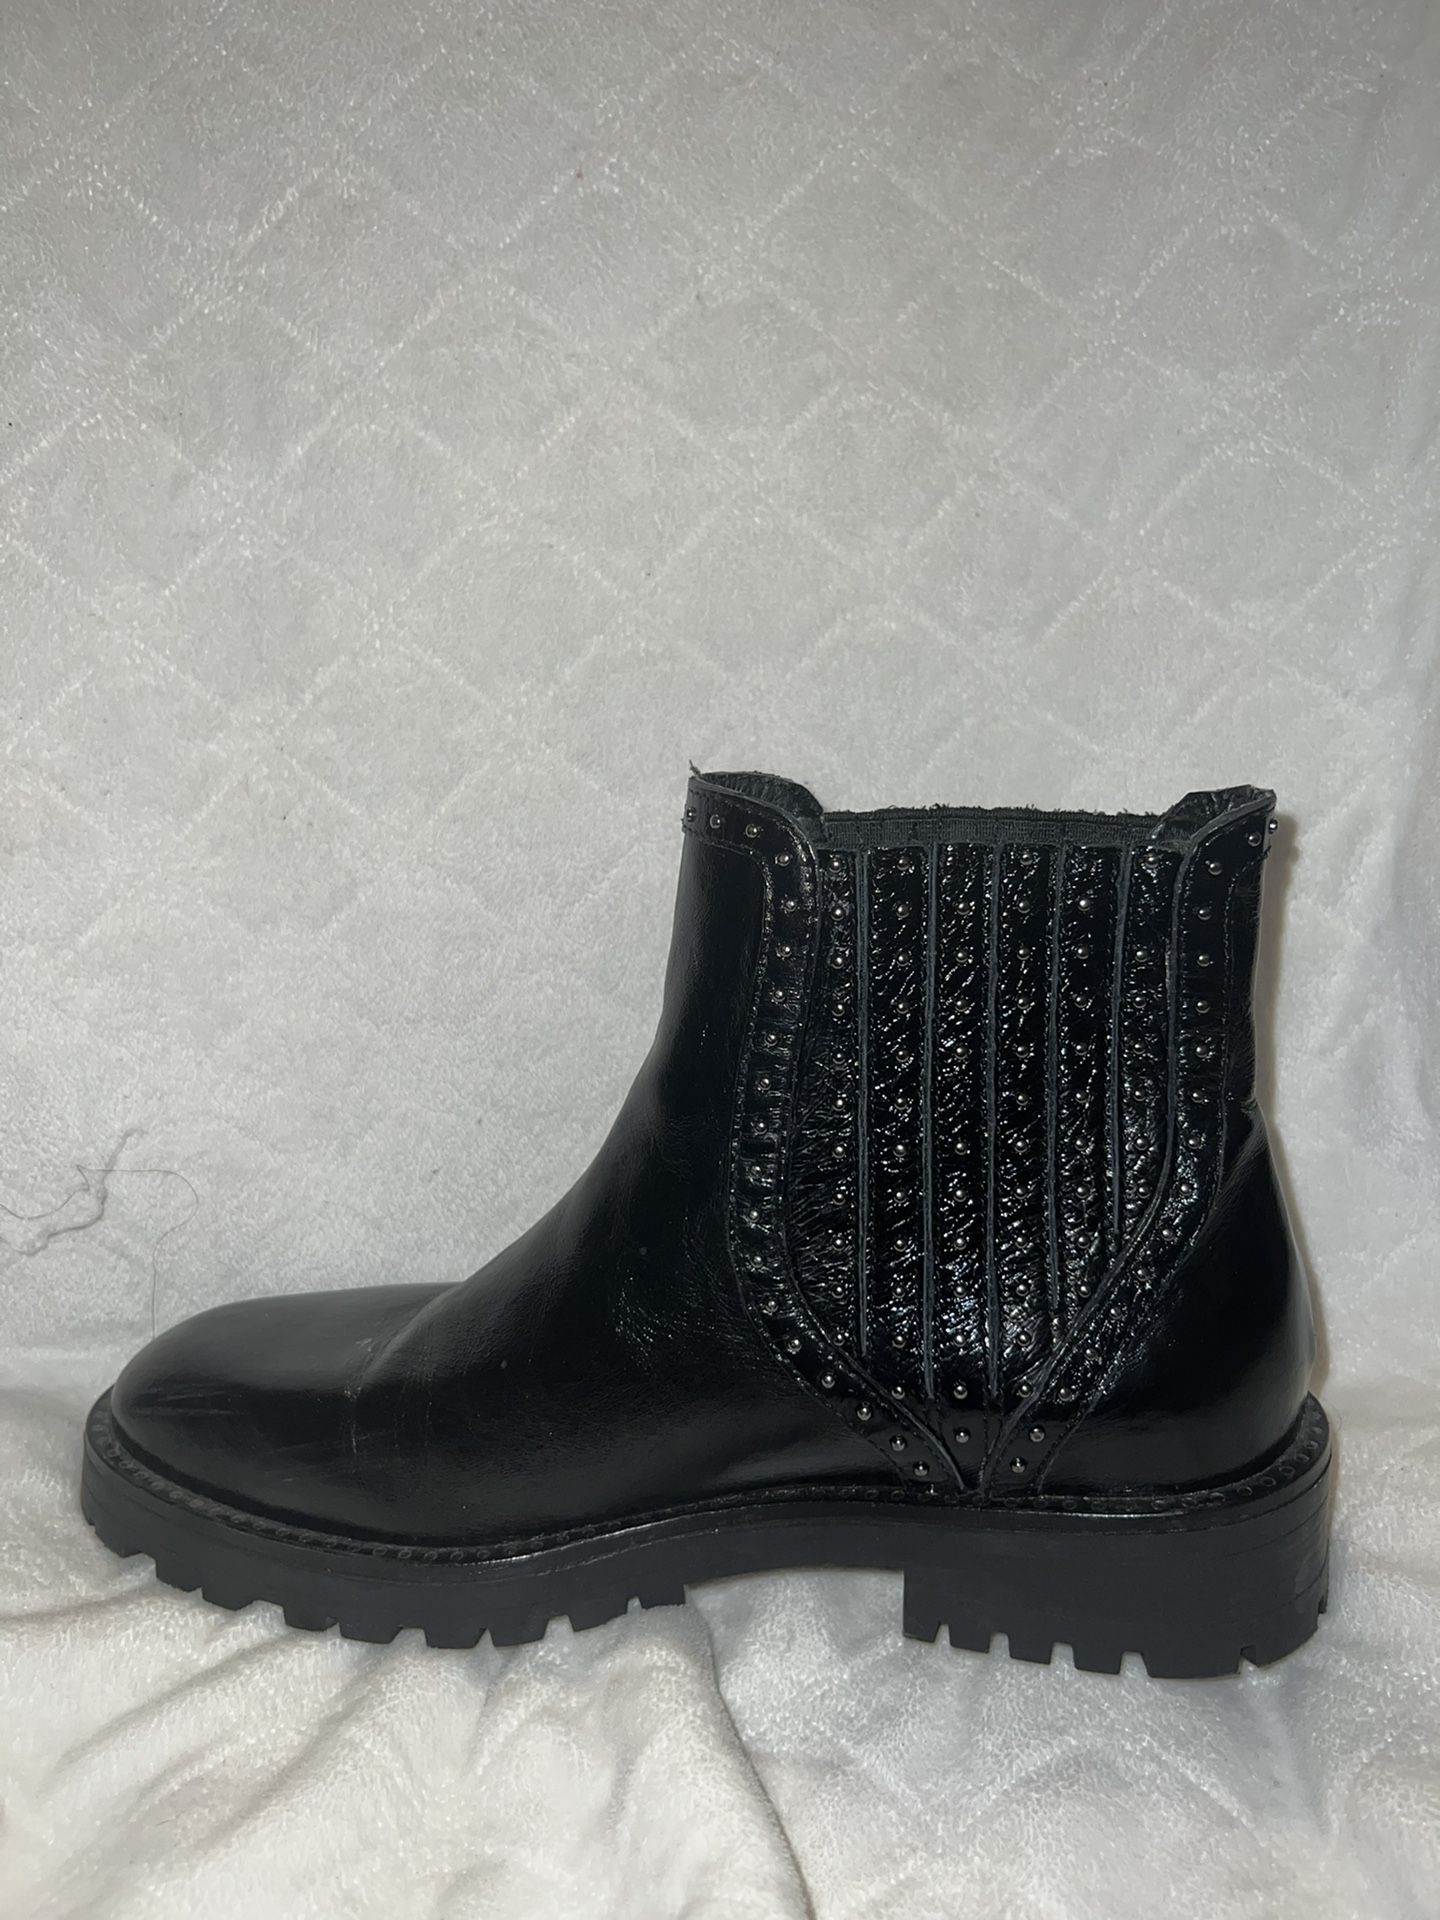 Zara Chelsea Ankle Boots Studs for Sale in FL - OfferUp